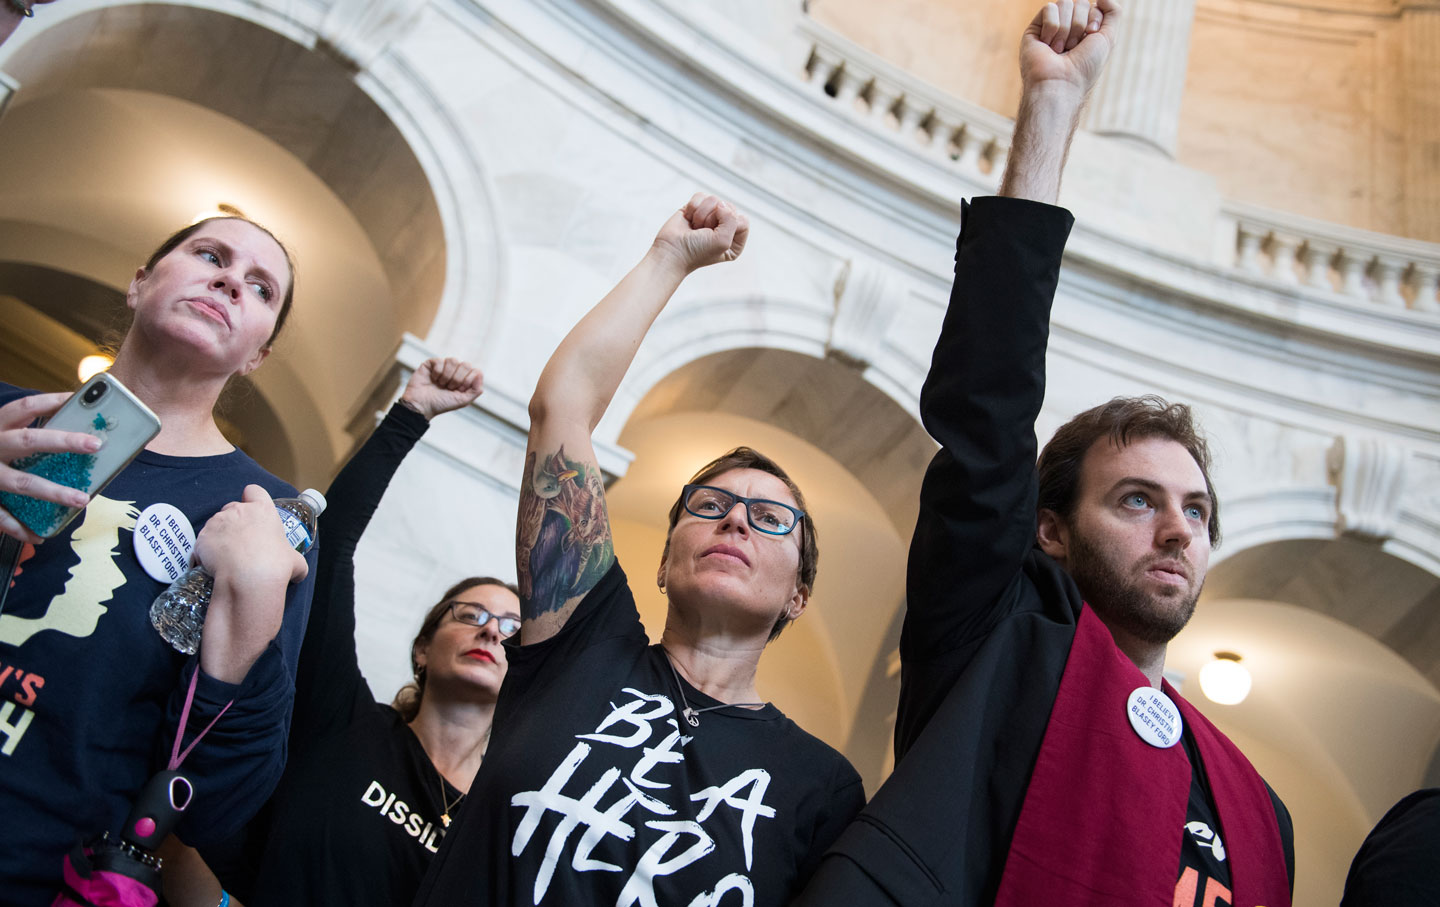 Protesters demonstrate in Russell Building to oppose the nomination of Supreme Court nominee Brett Kavanaugh on September 24, 2018.